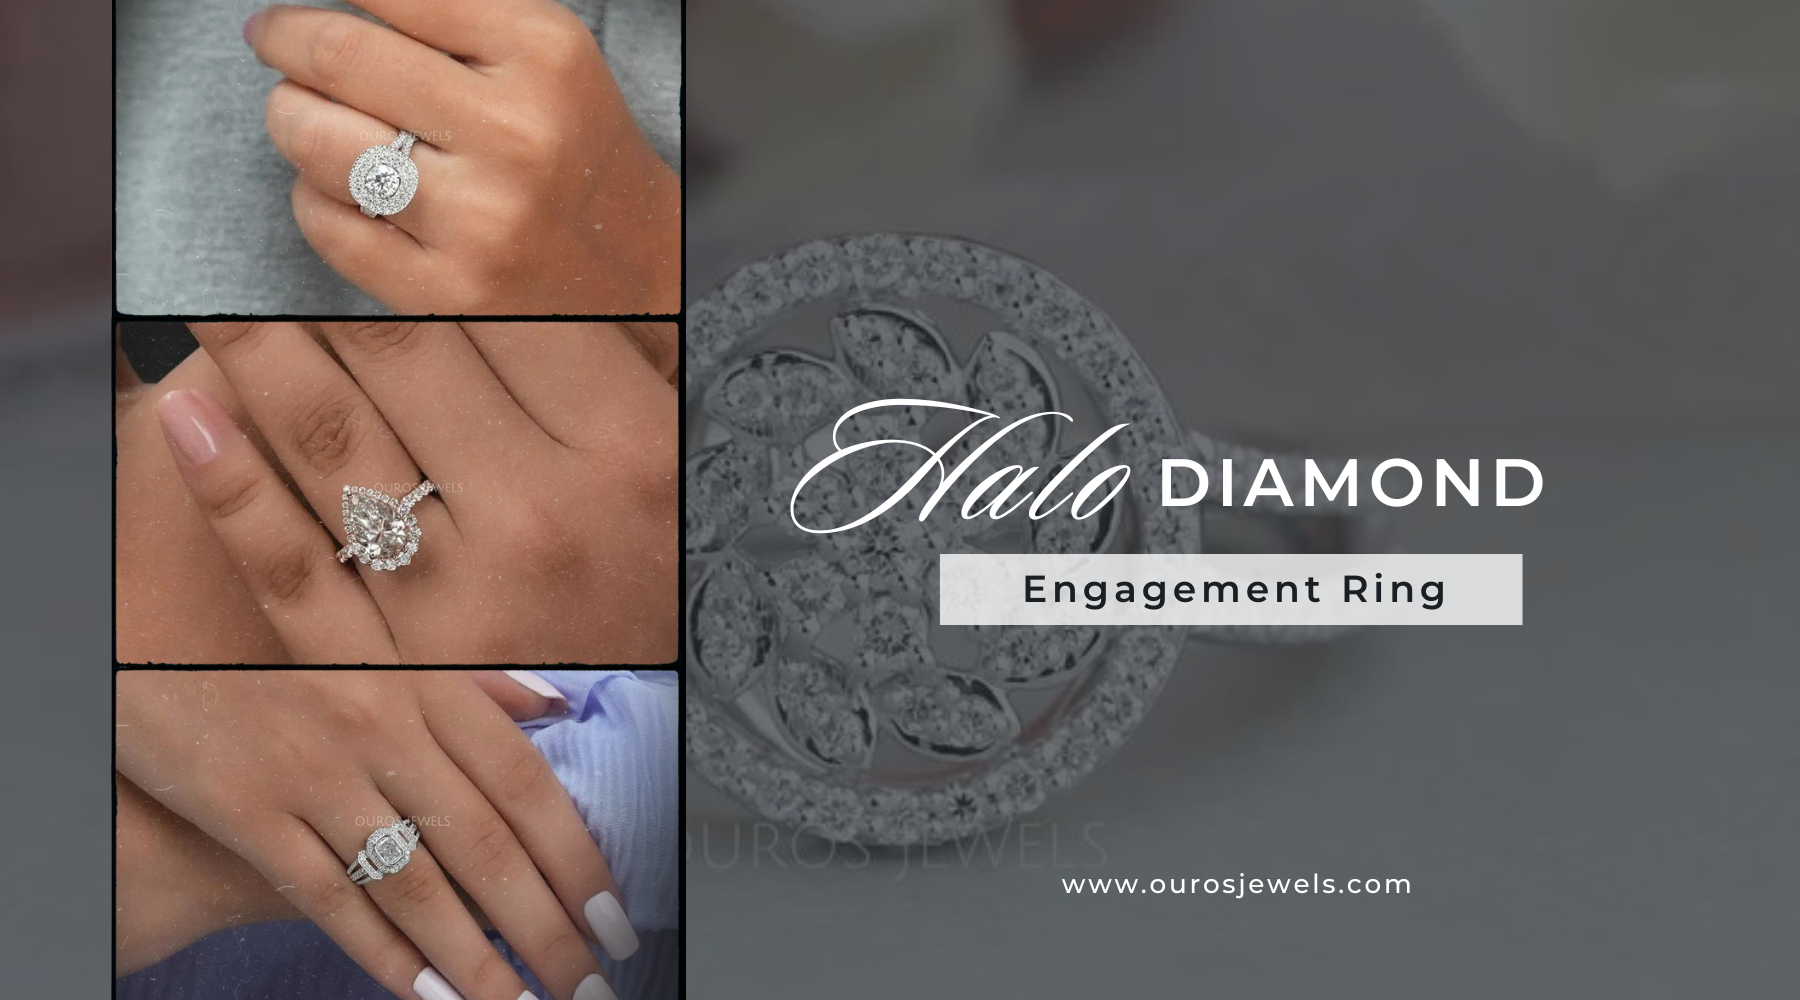 What is Halo Diamond Engagement Ring?